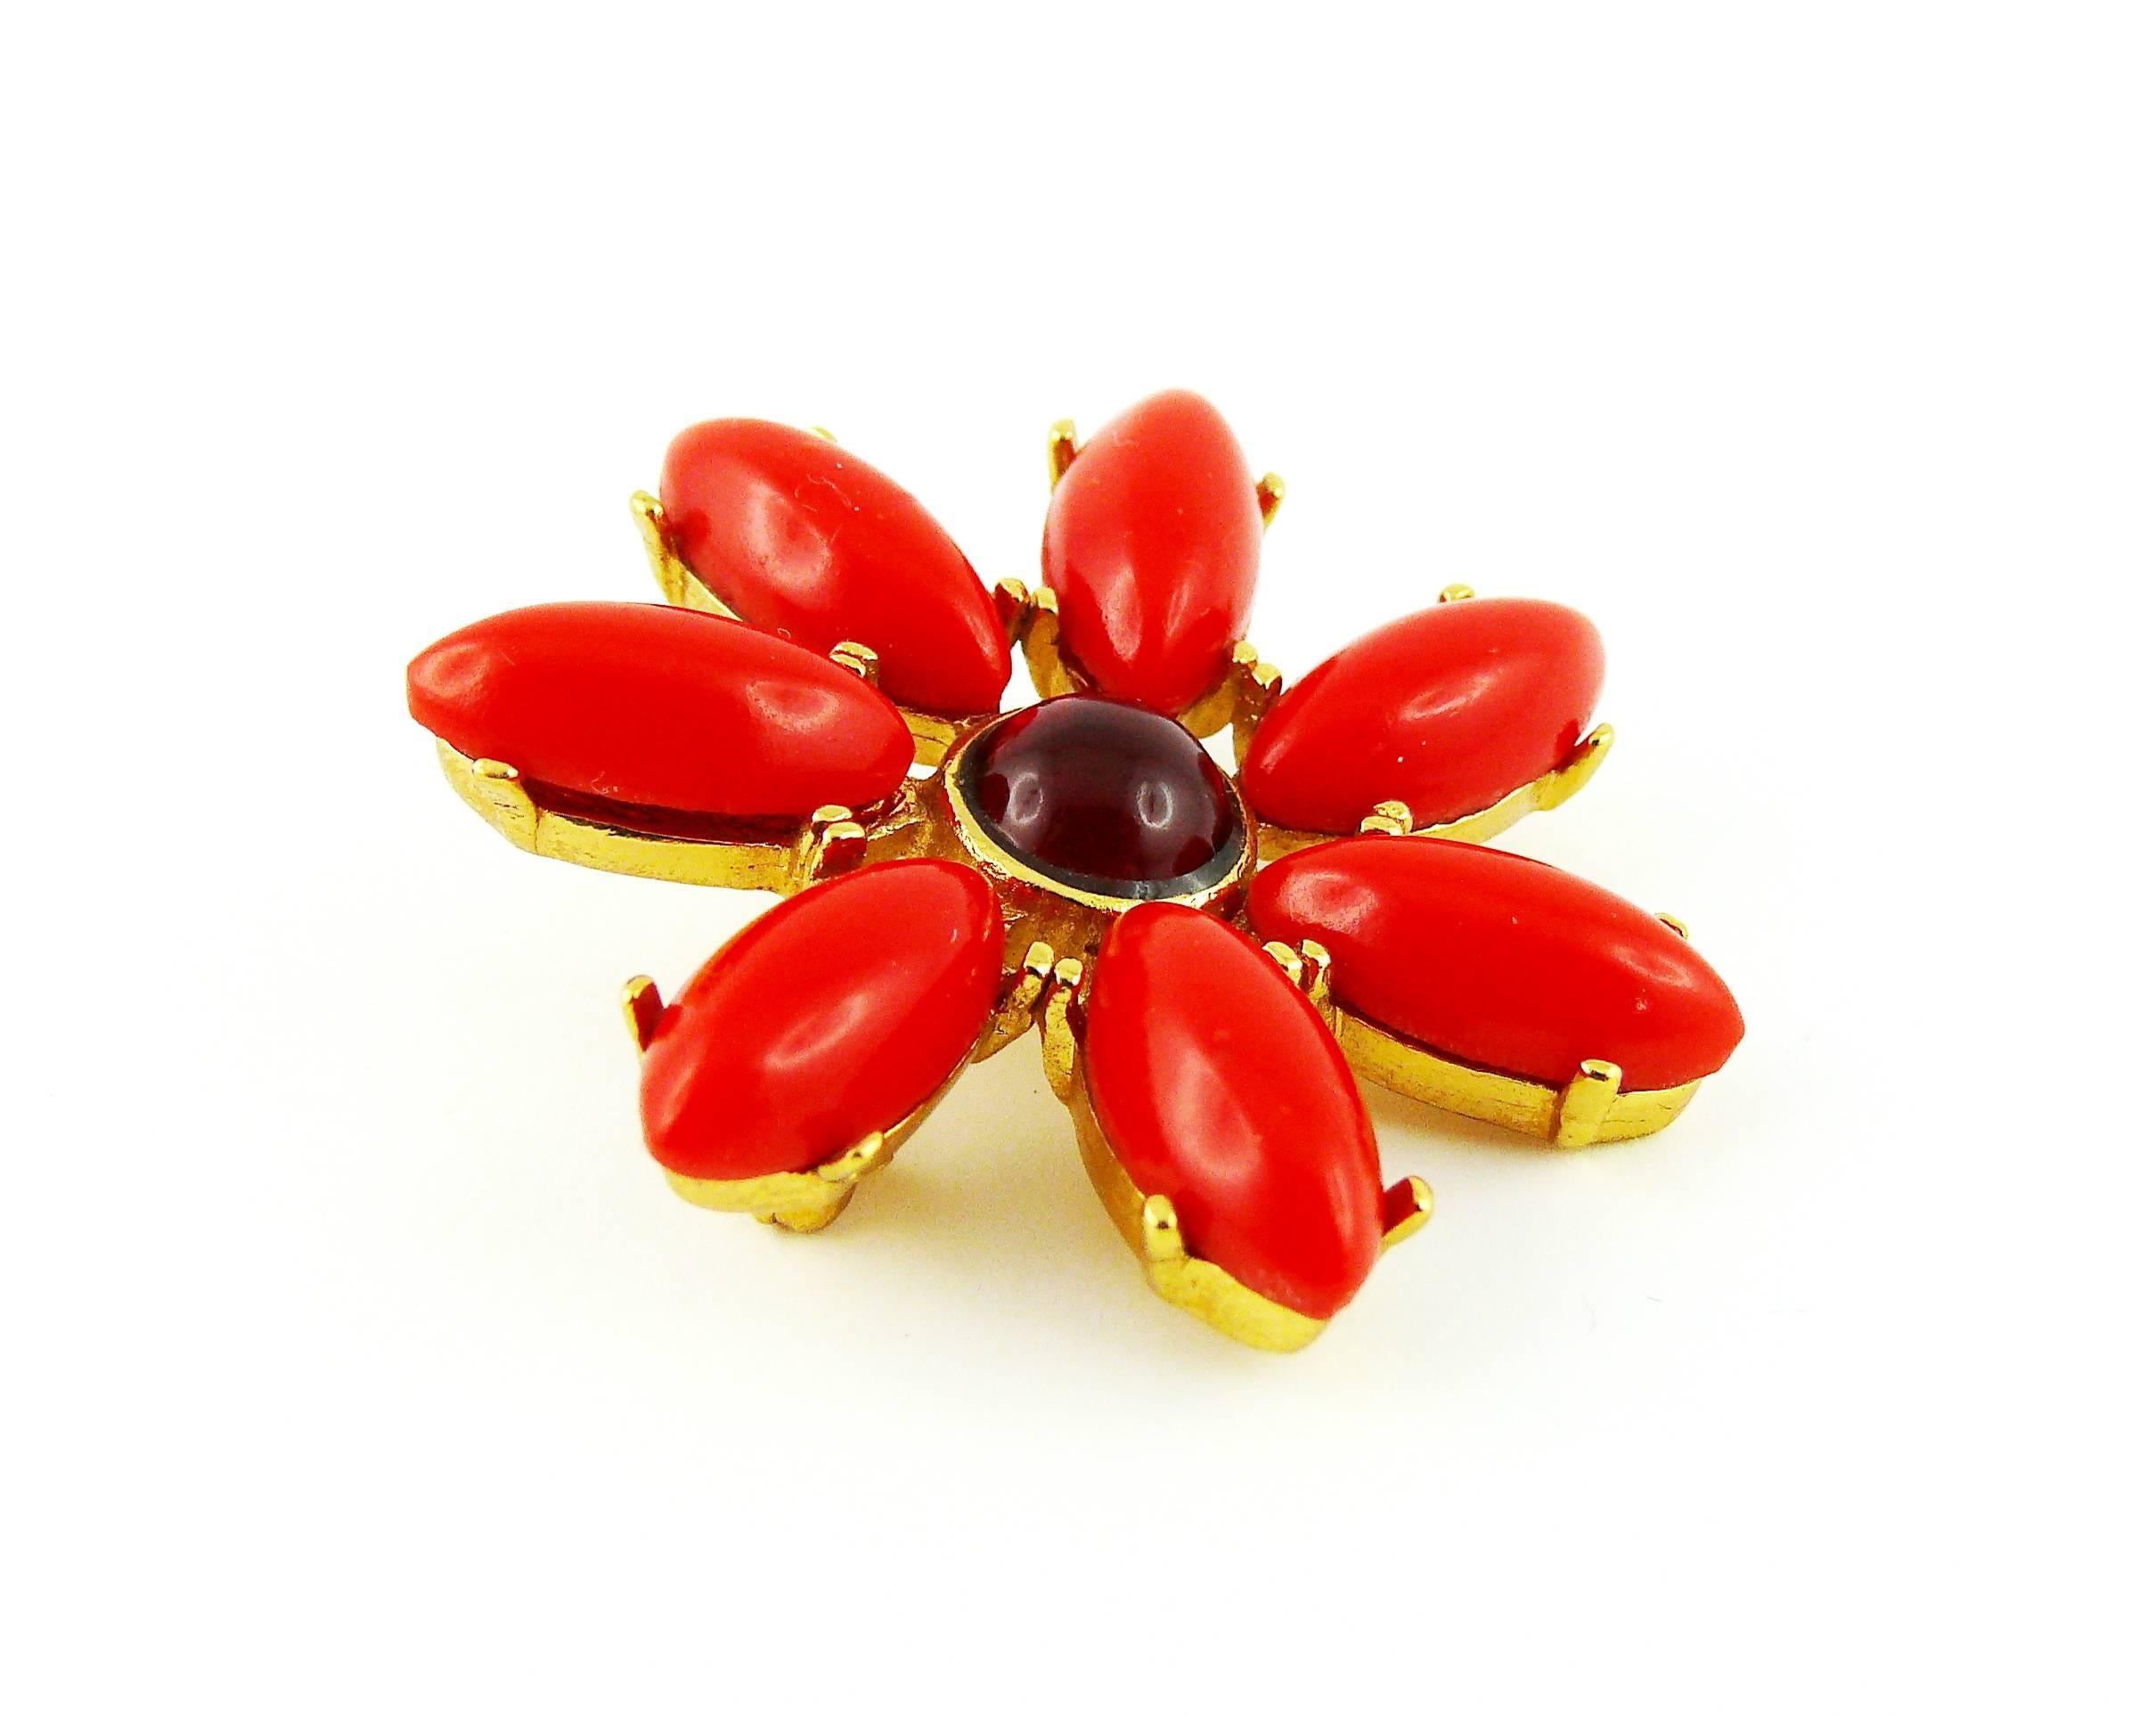 YVES SAINT LAURENT vintage flower brooch with faux coral petal resin cabochons and red glass cabochon.

Embossed YSL Made in France.

JEWELRY CONDITION CHART
- New or never worn : item is in pristine condition with no noticeable